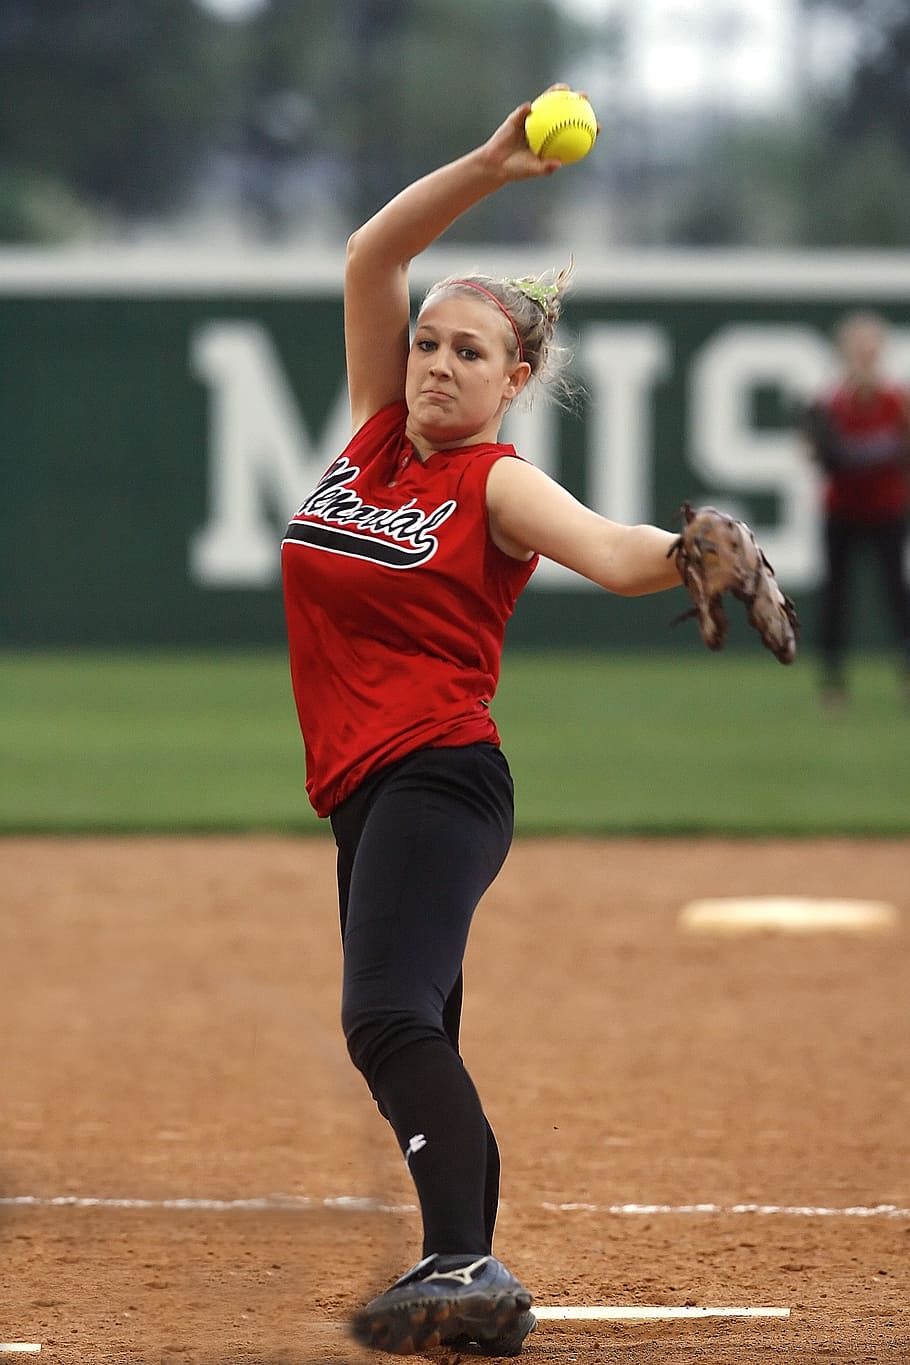 Softball, Pitcher, Female, Action, pitching, pitcher's mound, infield, ball park, field, game